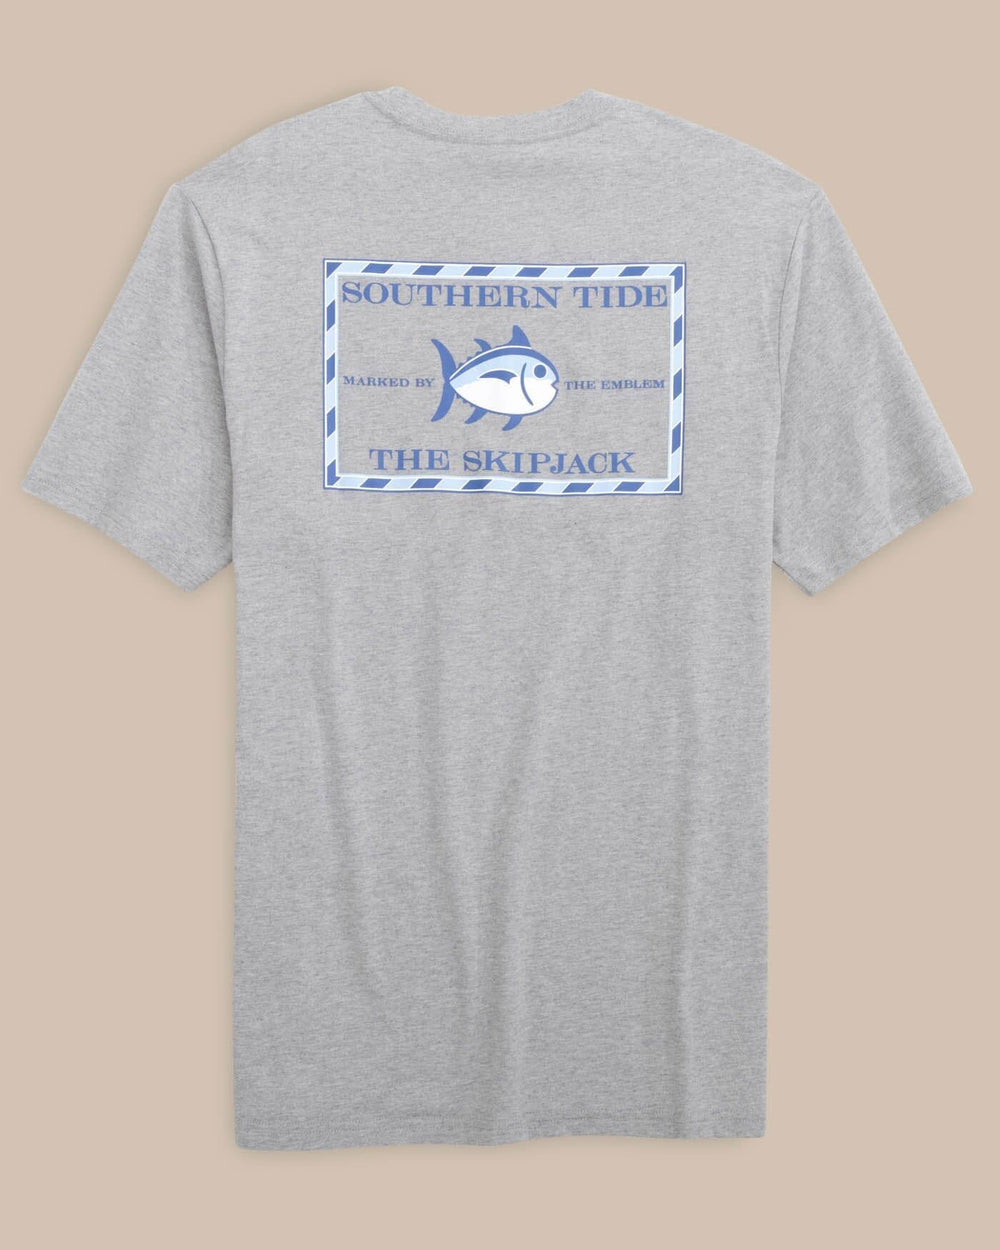 The back view of the Southern Tide Heathered Original Skipjack T-Shirt by Southern Tide - Heather Quarry